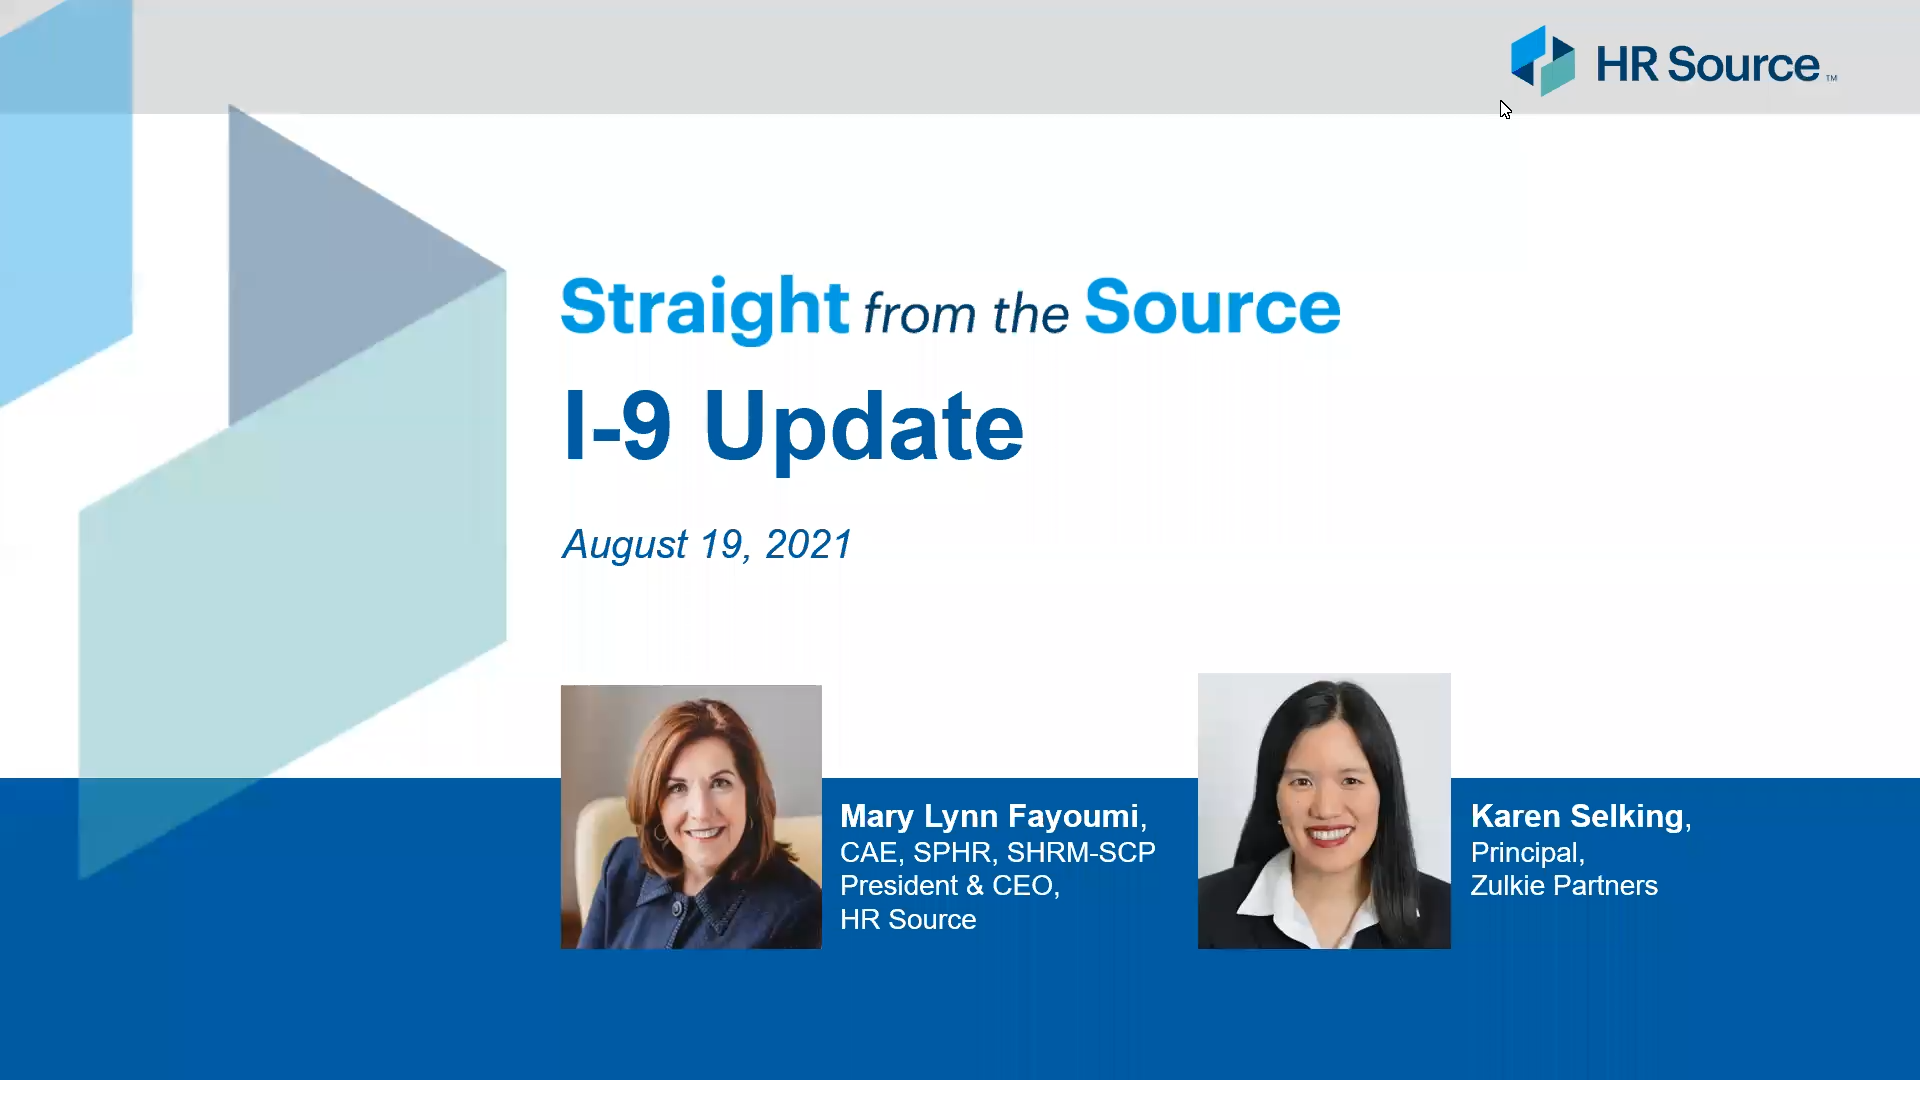 Straight from the Source: I-9 Update